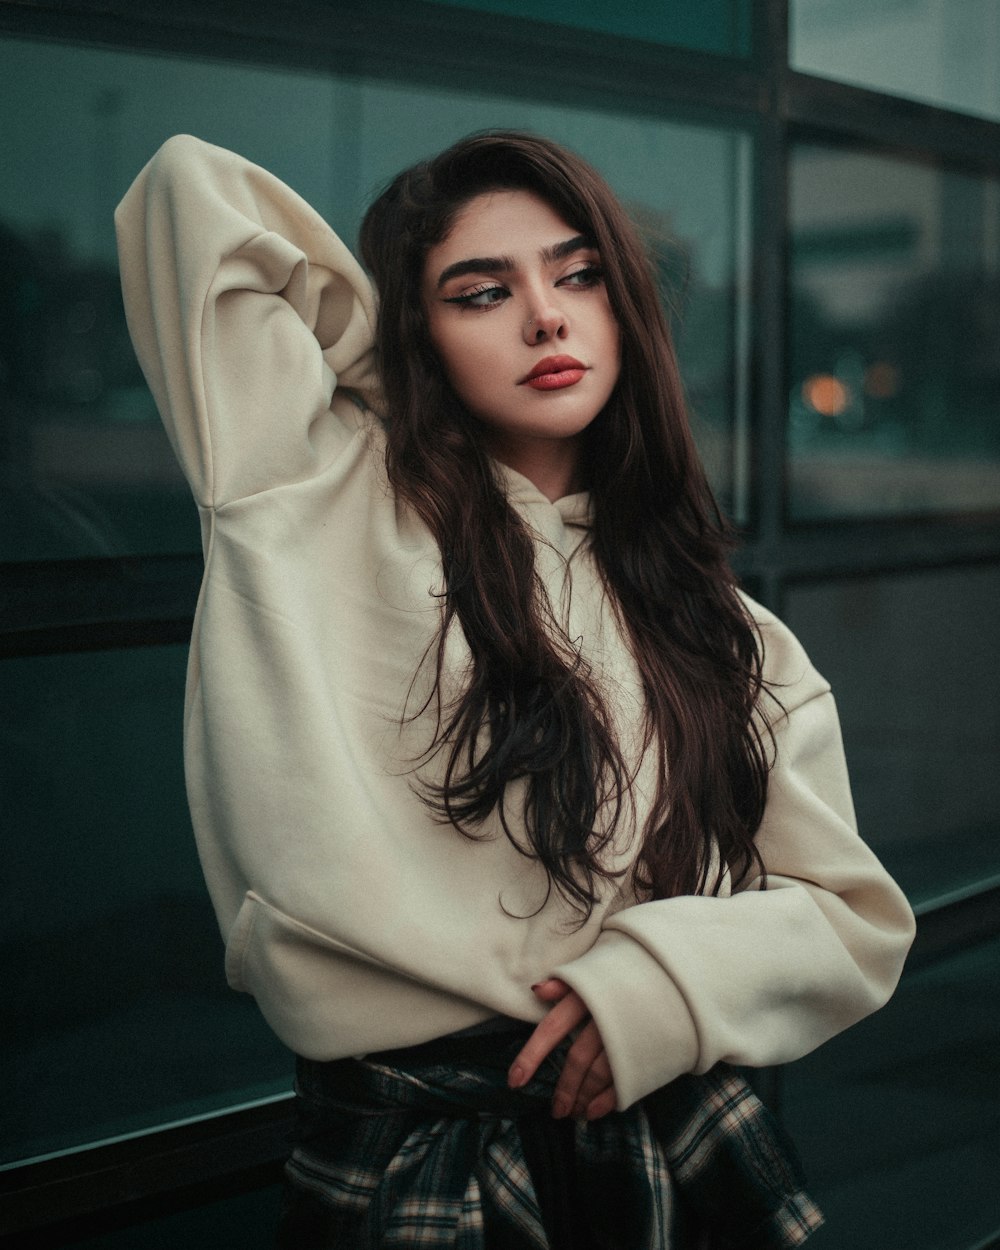 a woman with long hair wearing a white sweater